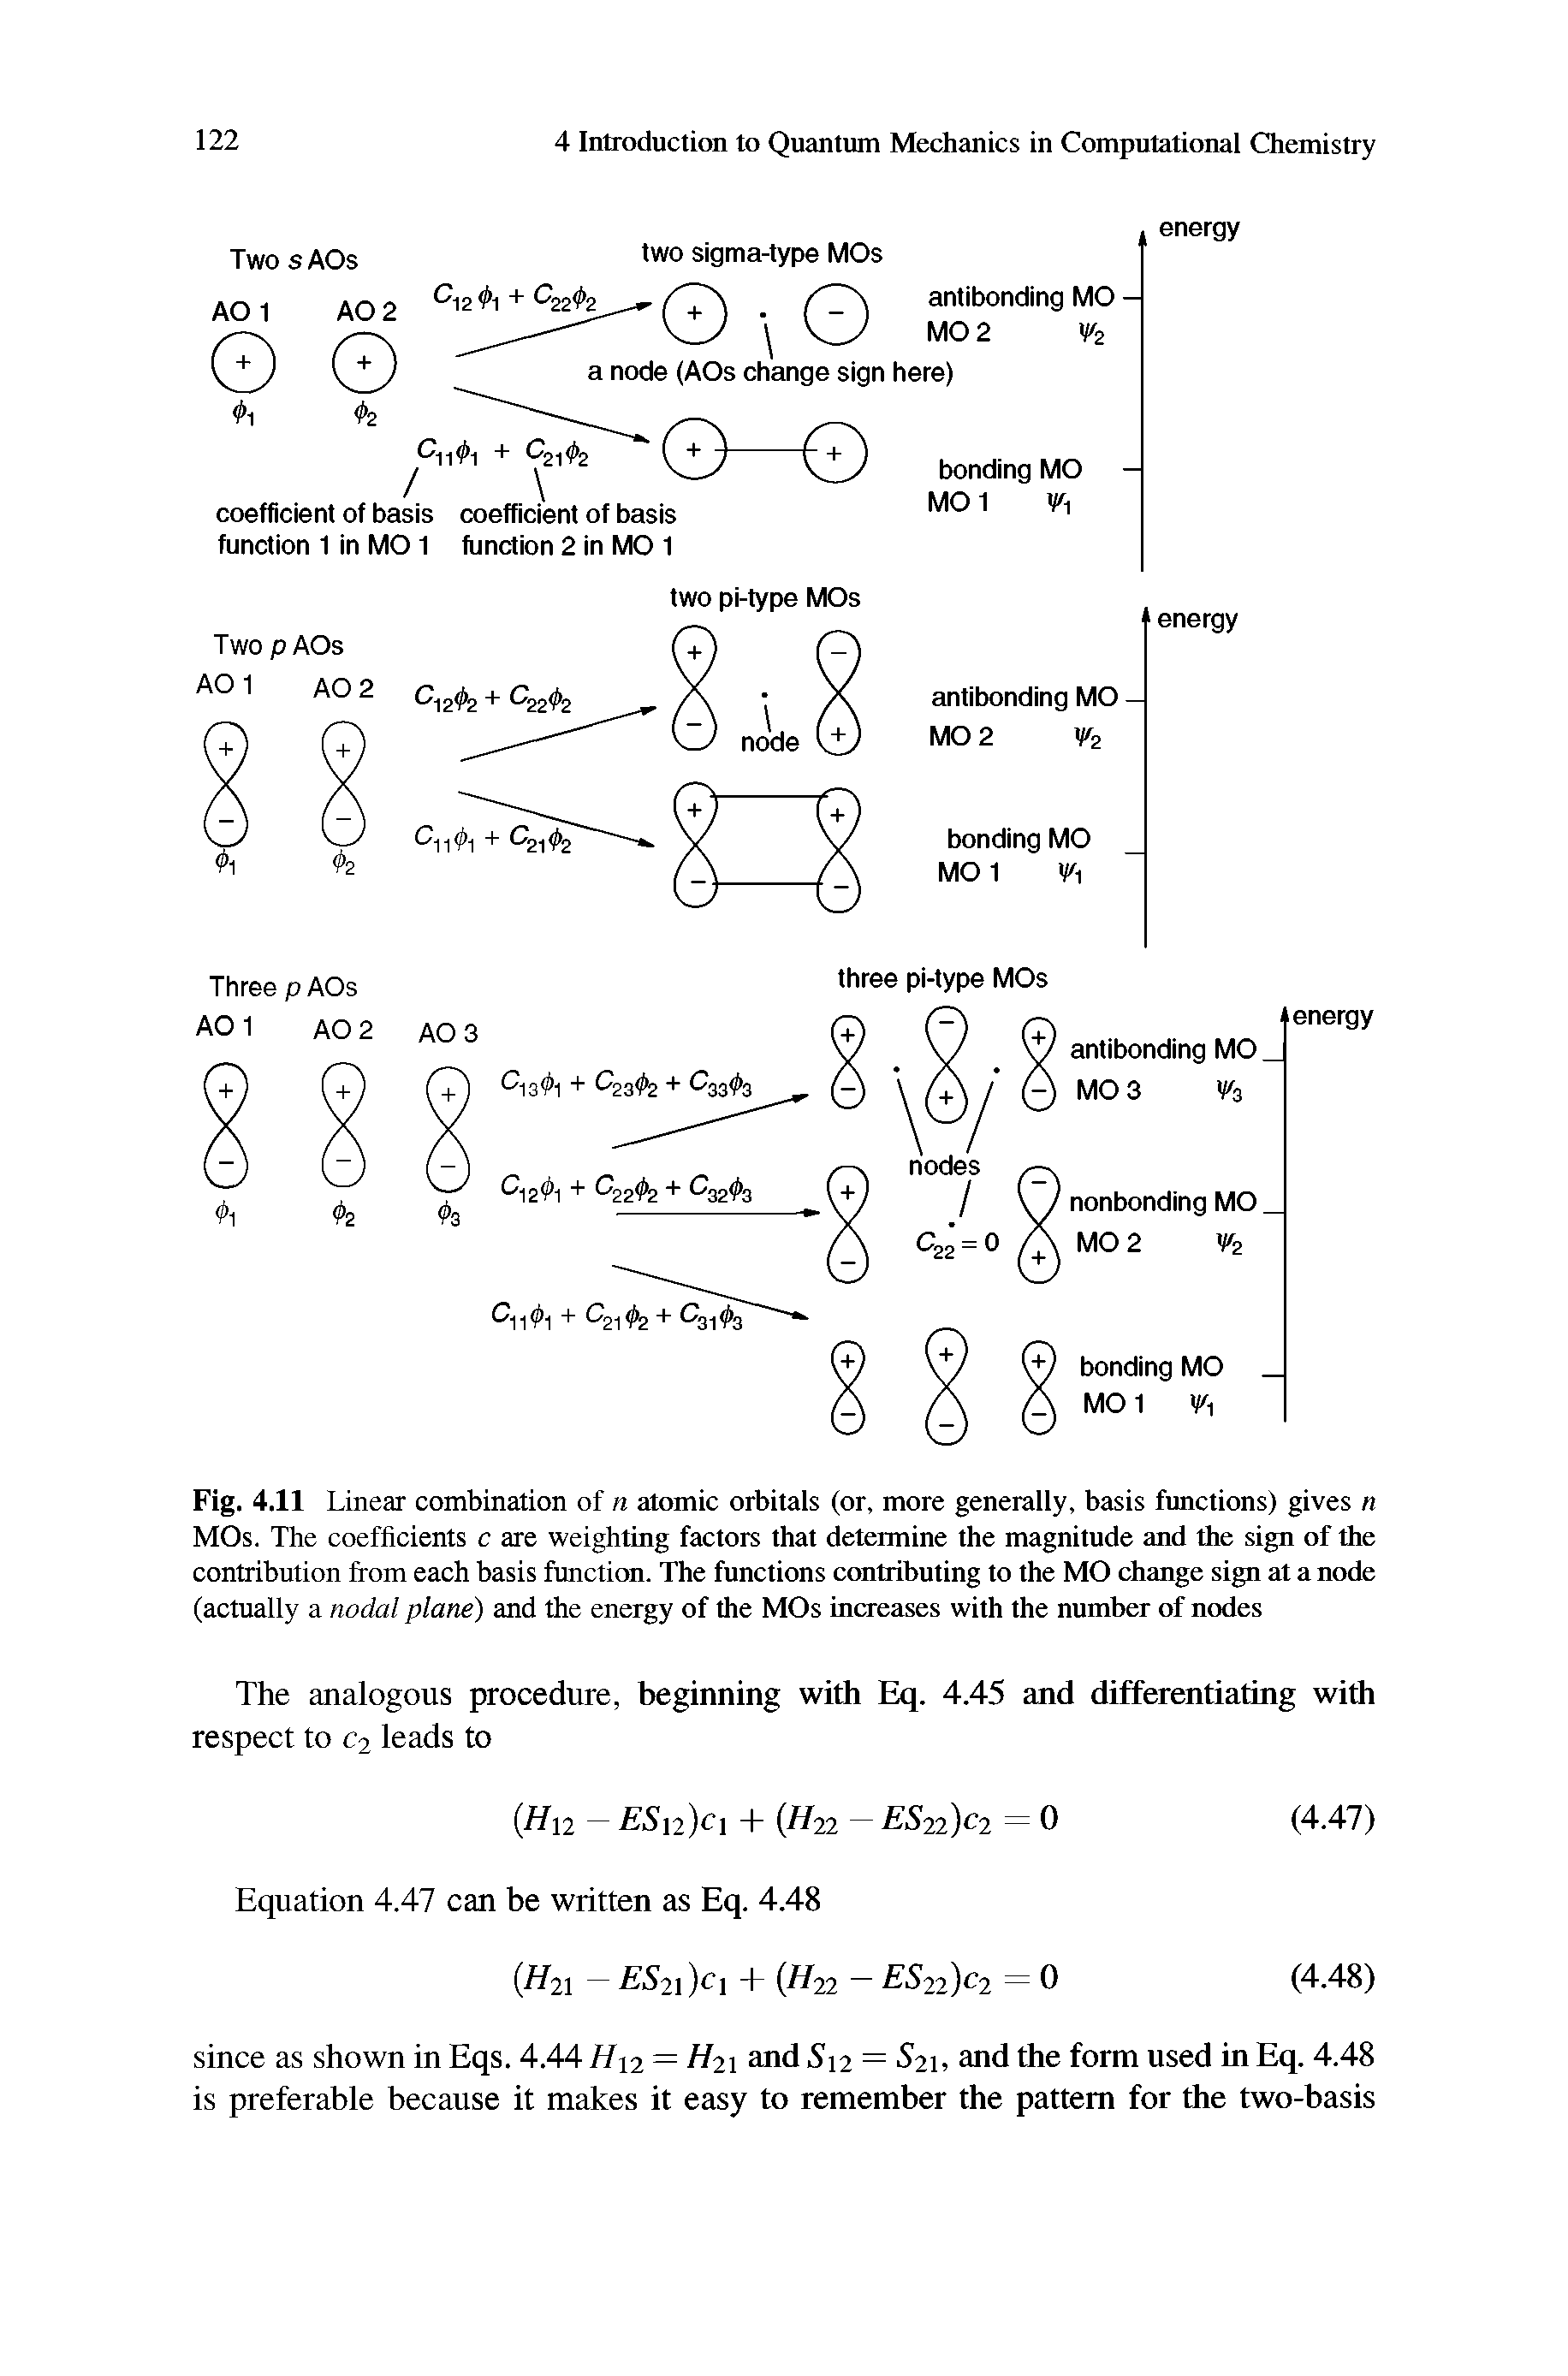 Fig. 4.11 Linear combination of n atomic orbitals (or, more generally, basis functions) gives n MOs. The coefficients c are weighting factors that determine the magnitude and the sign of the contribution from each basis function. The functions contributing to the MO change sign at a node (actually a nodal plane) and the energy of the MOs increases with the number of nodes...